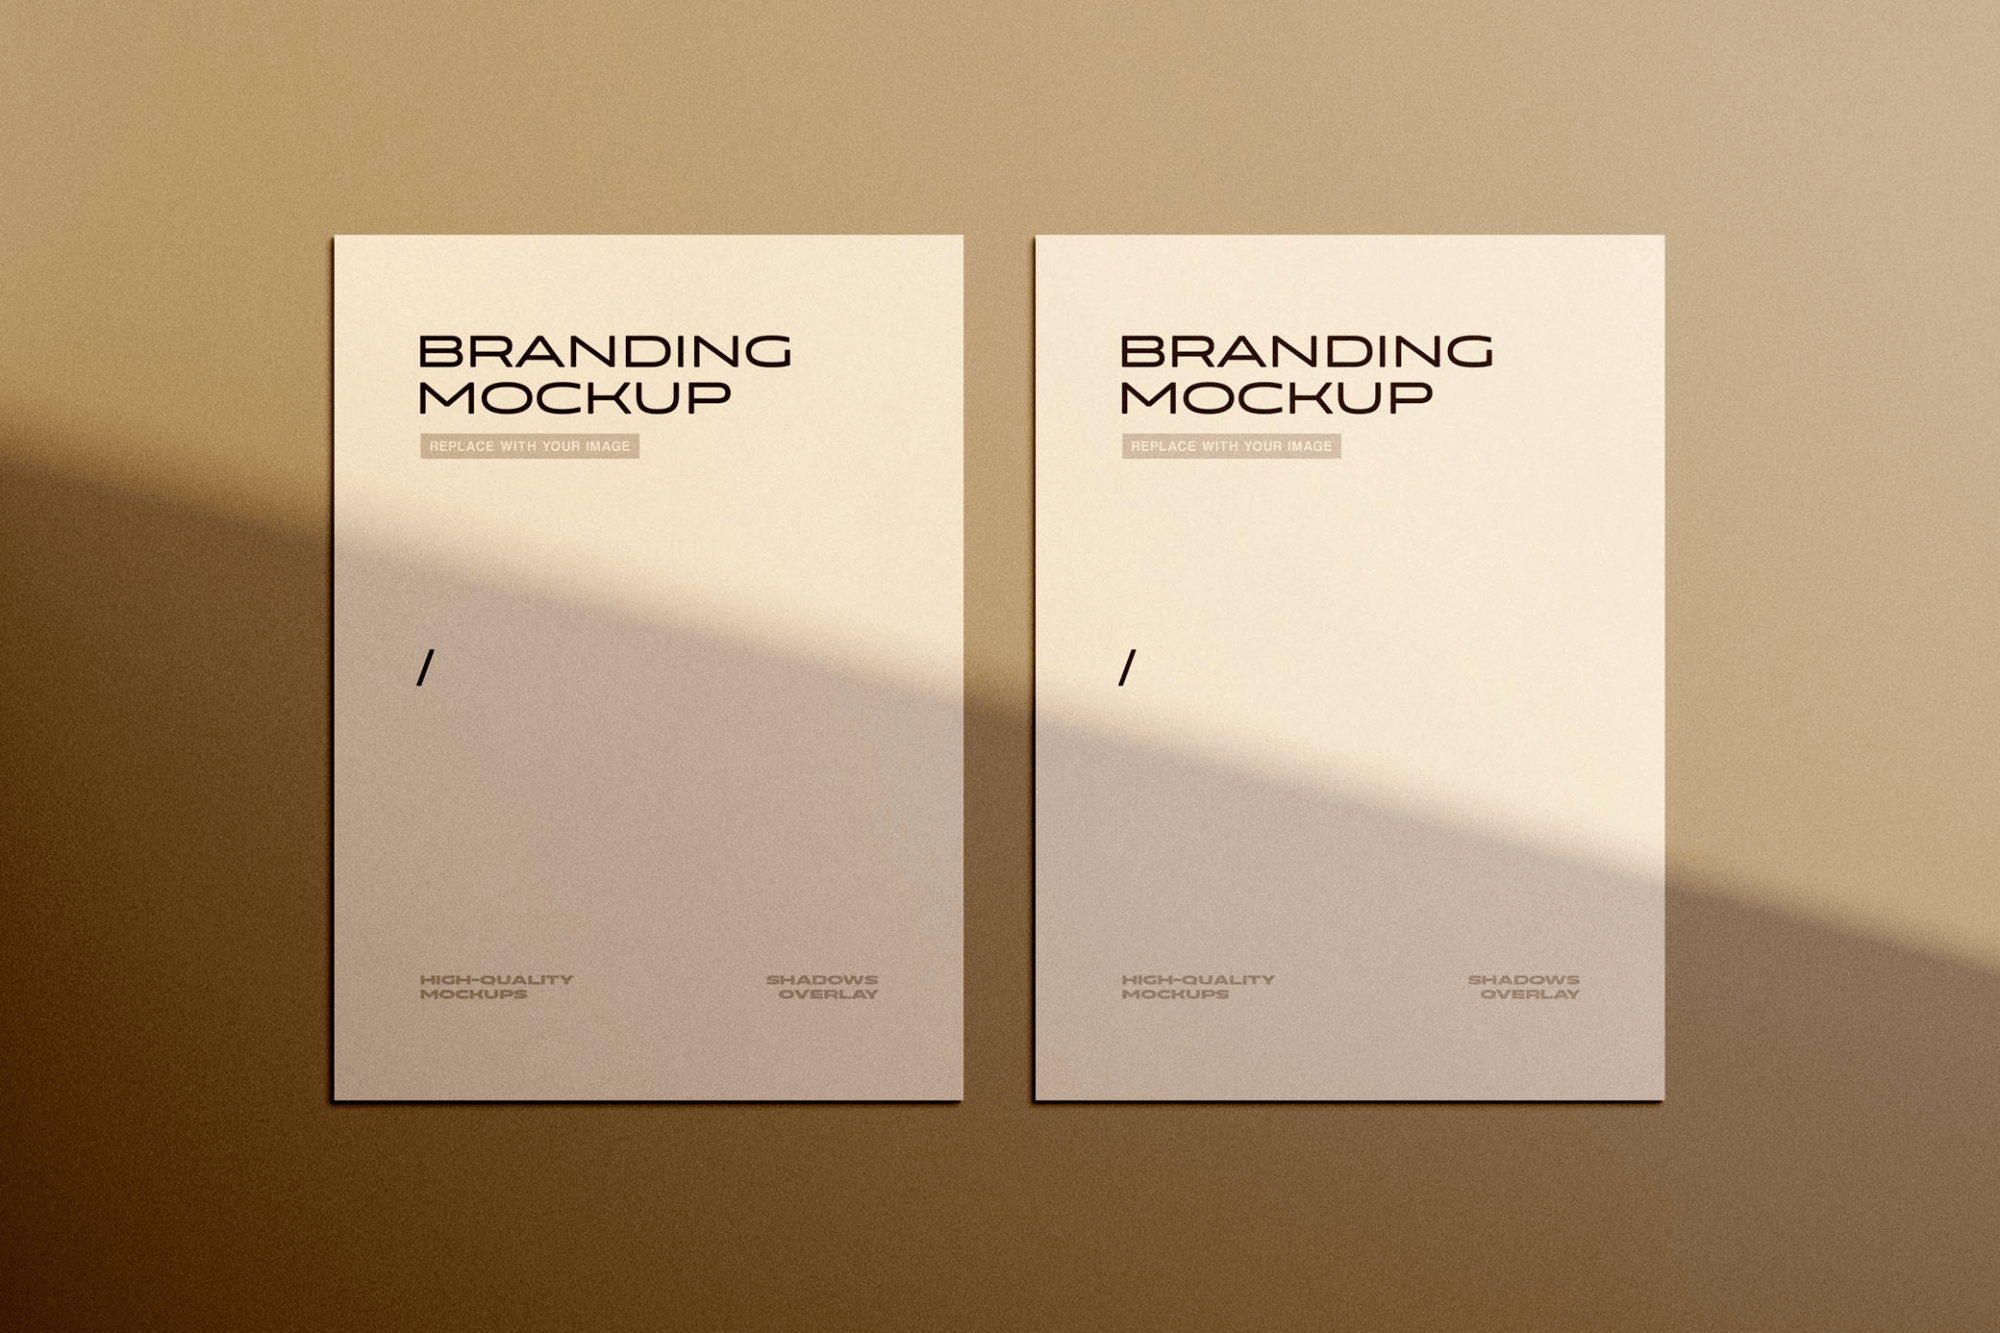 Two vertical letterhead mockups casting soft shadows on a beige surface, exemplifying a minimalist branding identity design.